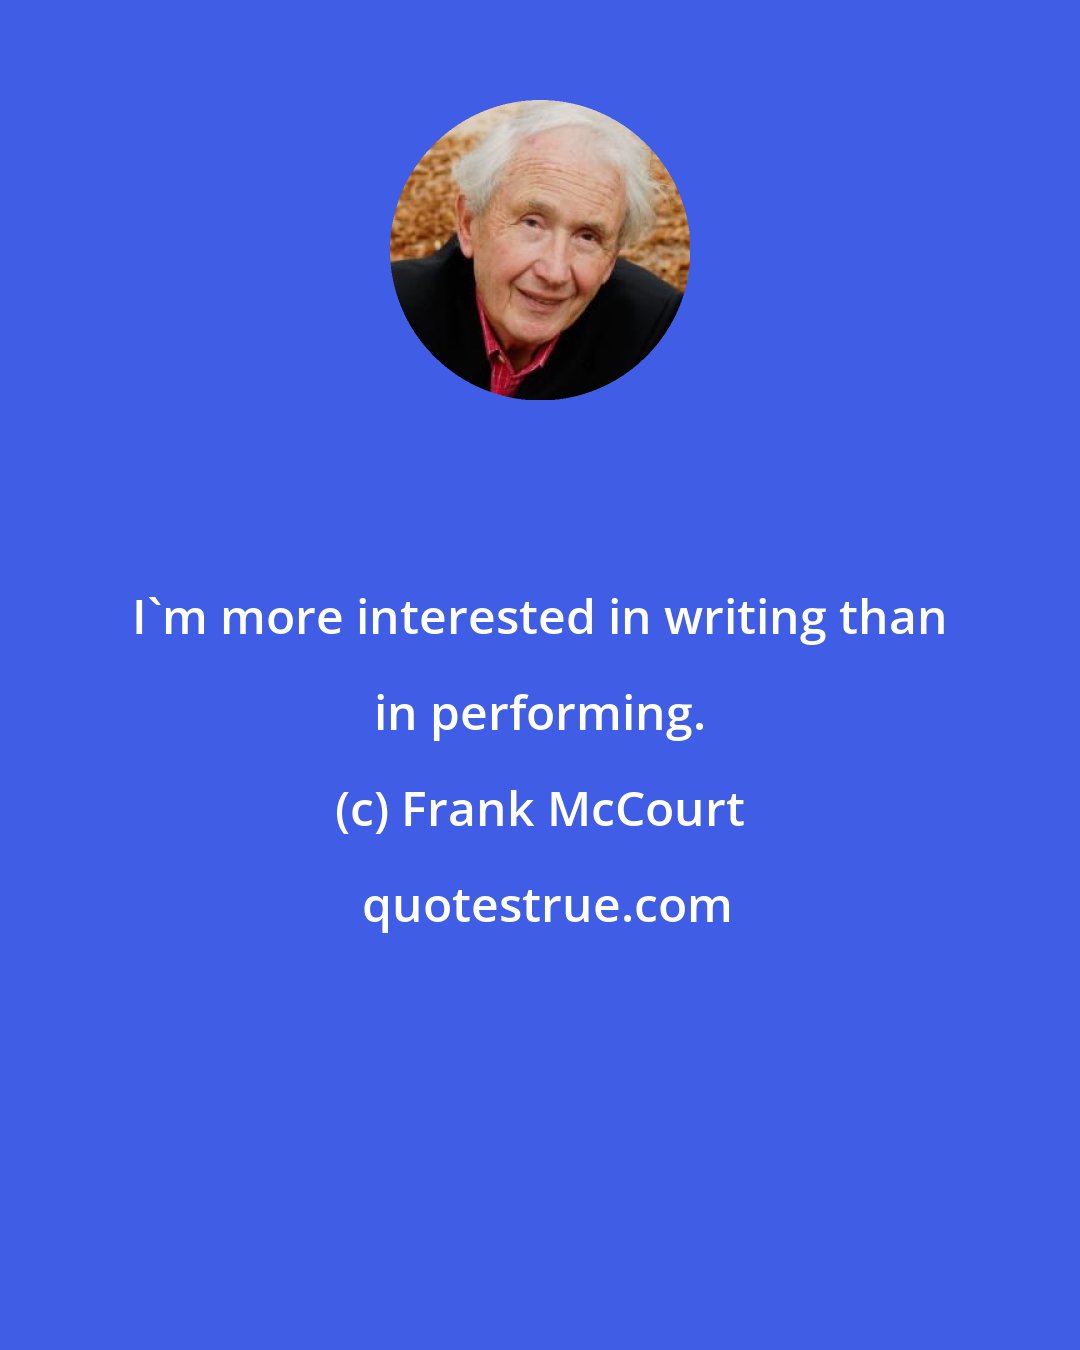 Frank McCourt: I'm more interested in writing than in performing.